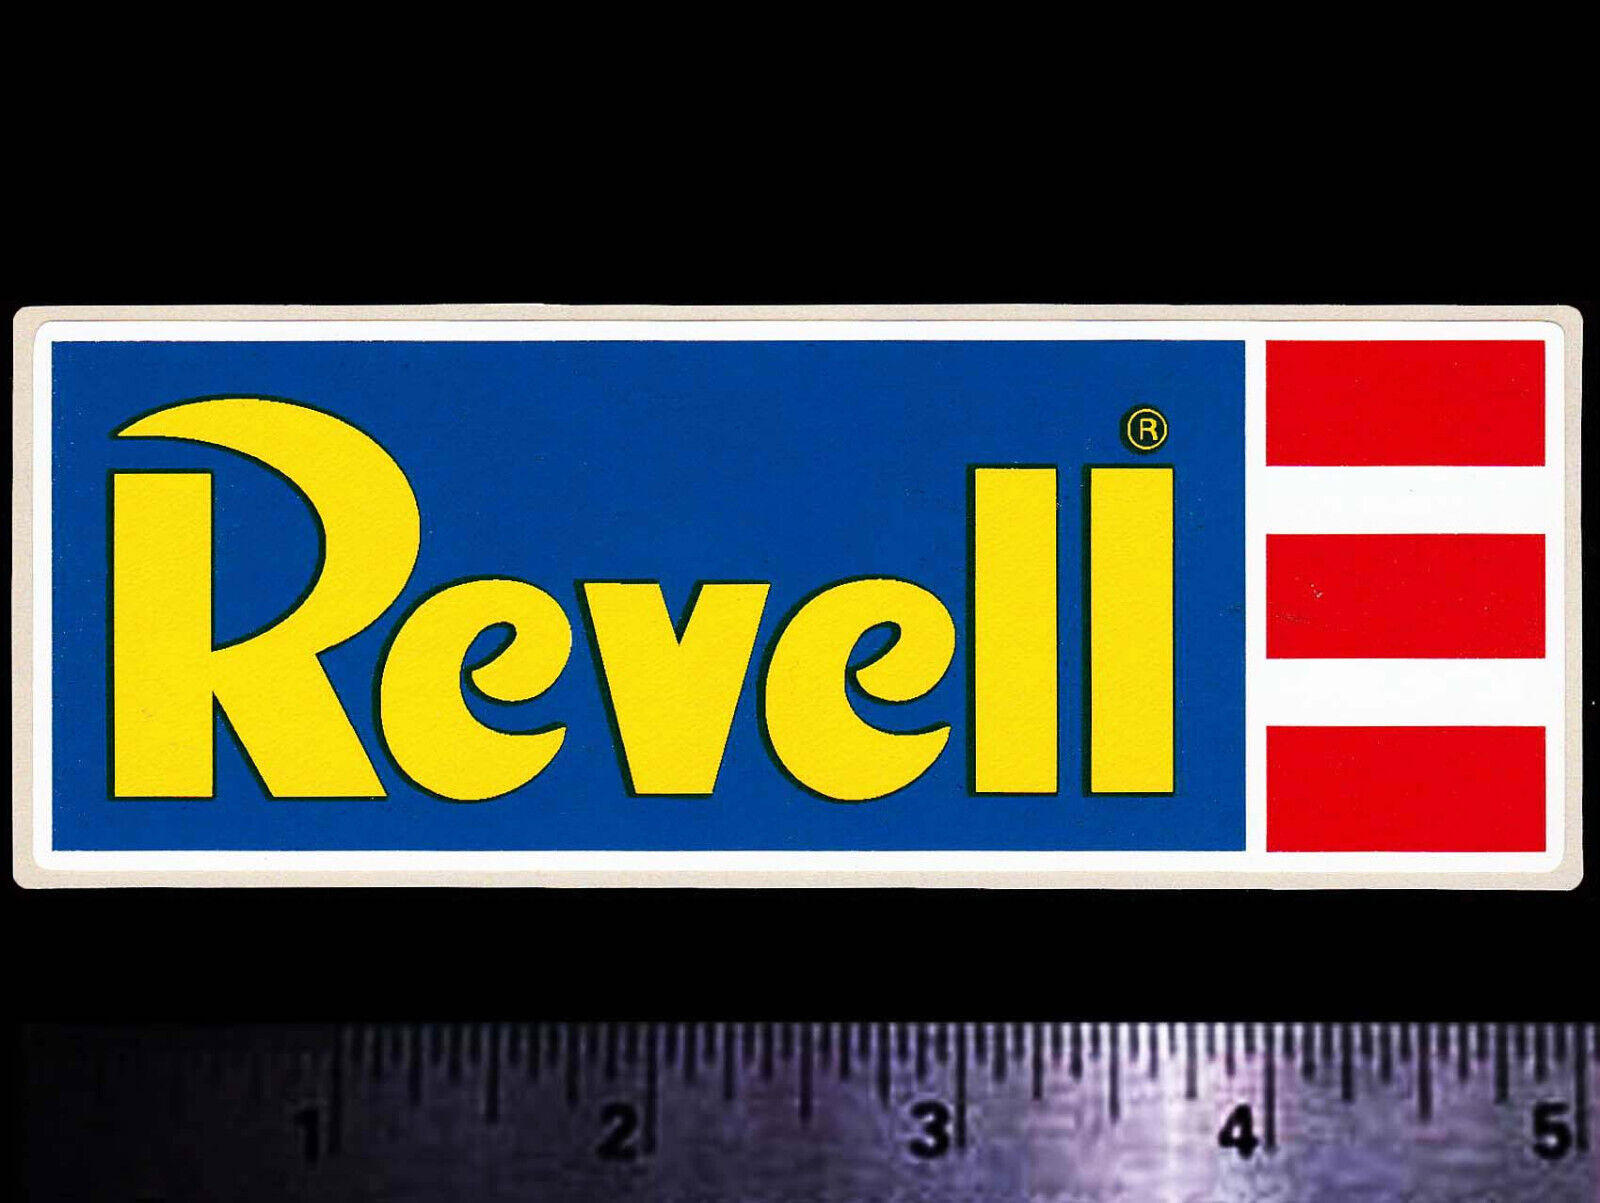 REVELL - Original Vintage 1970's 80’s Racing Decal/Sticker MODELS Toys